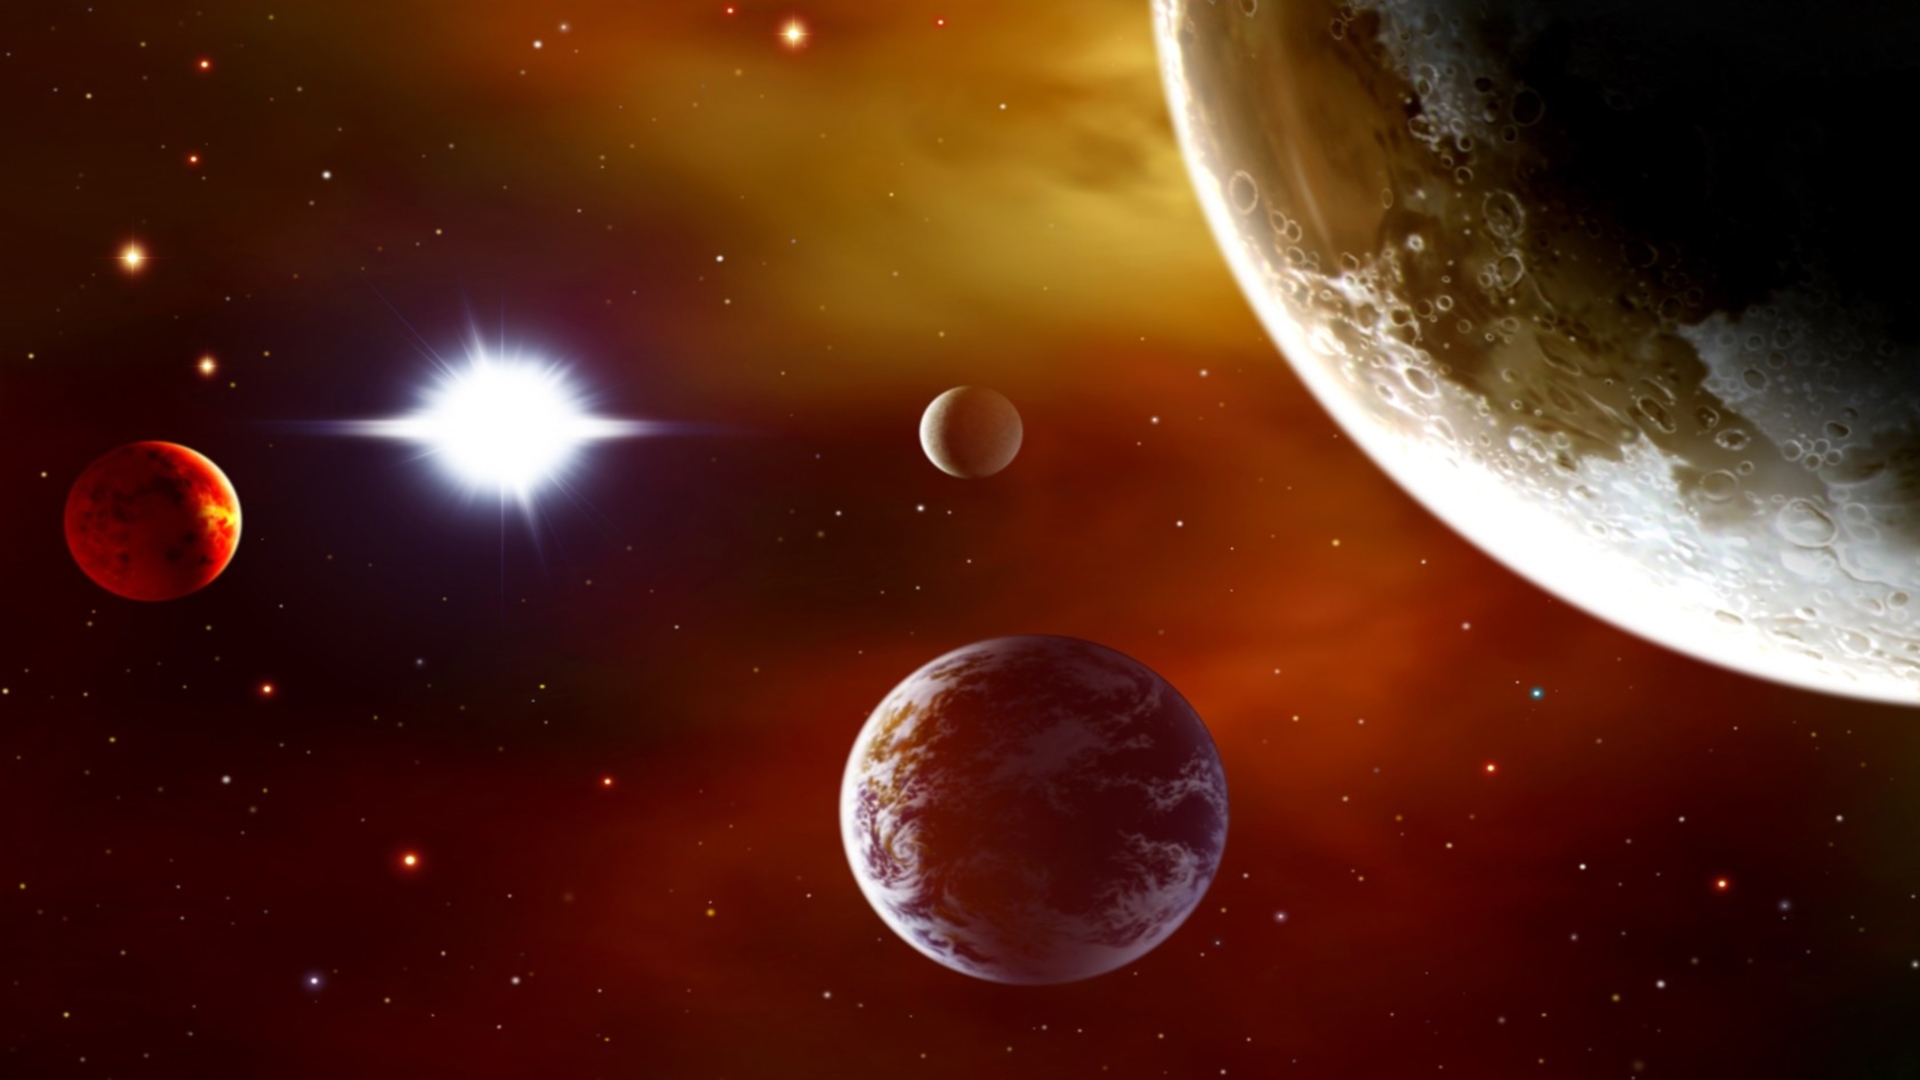 Here are some awesome space wallpapers in HD for your desktop